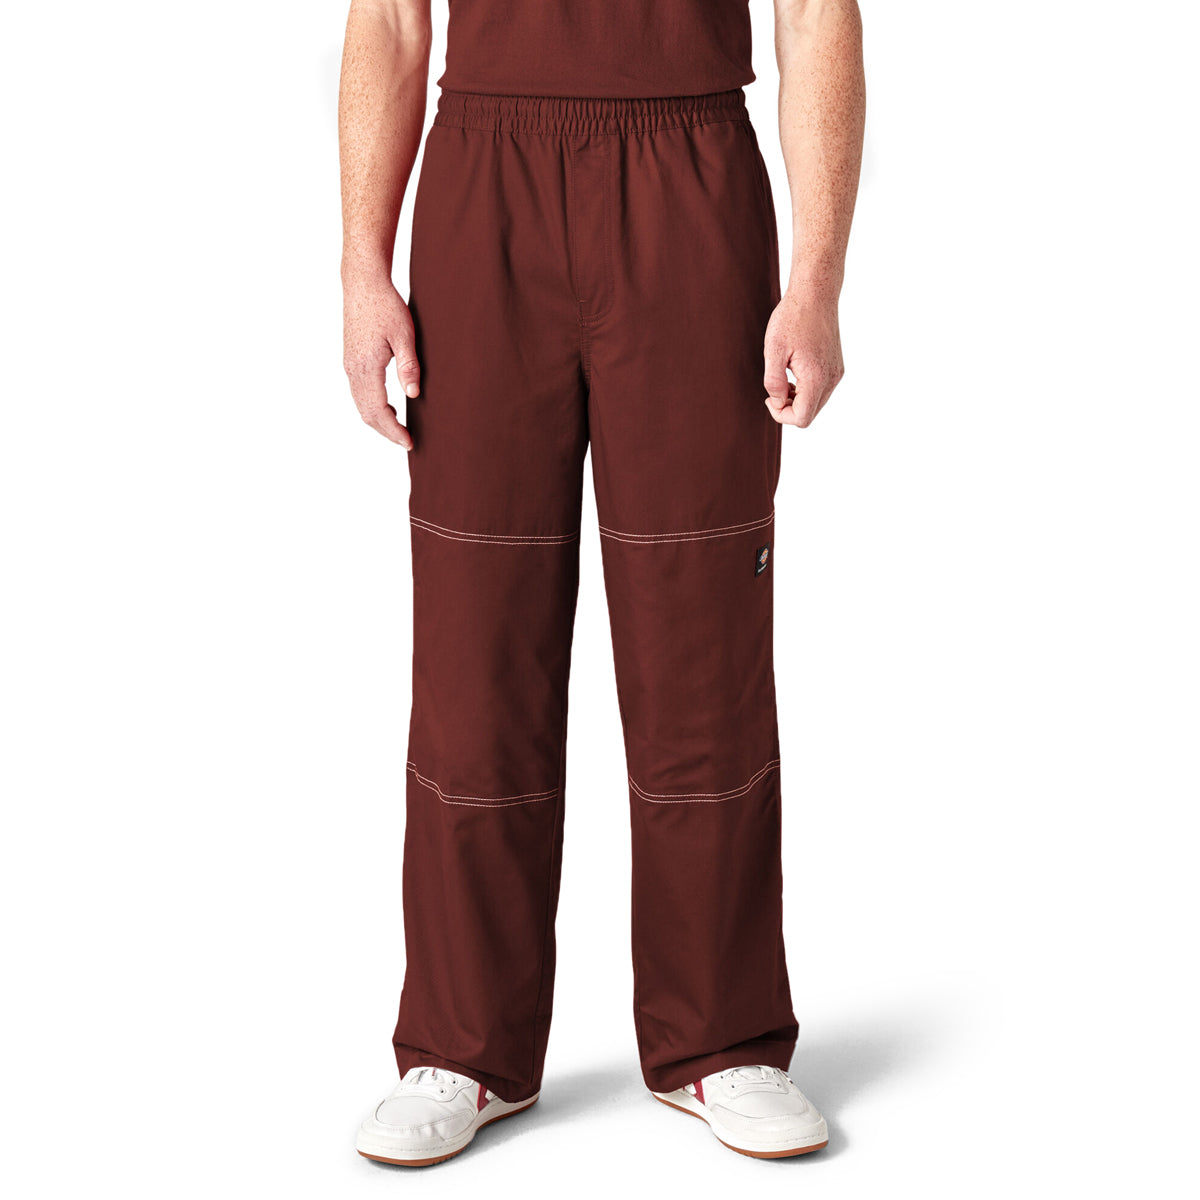 Dickies Summit Relaxed Fit Chef Pants - Fired Brick image 1